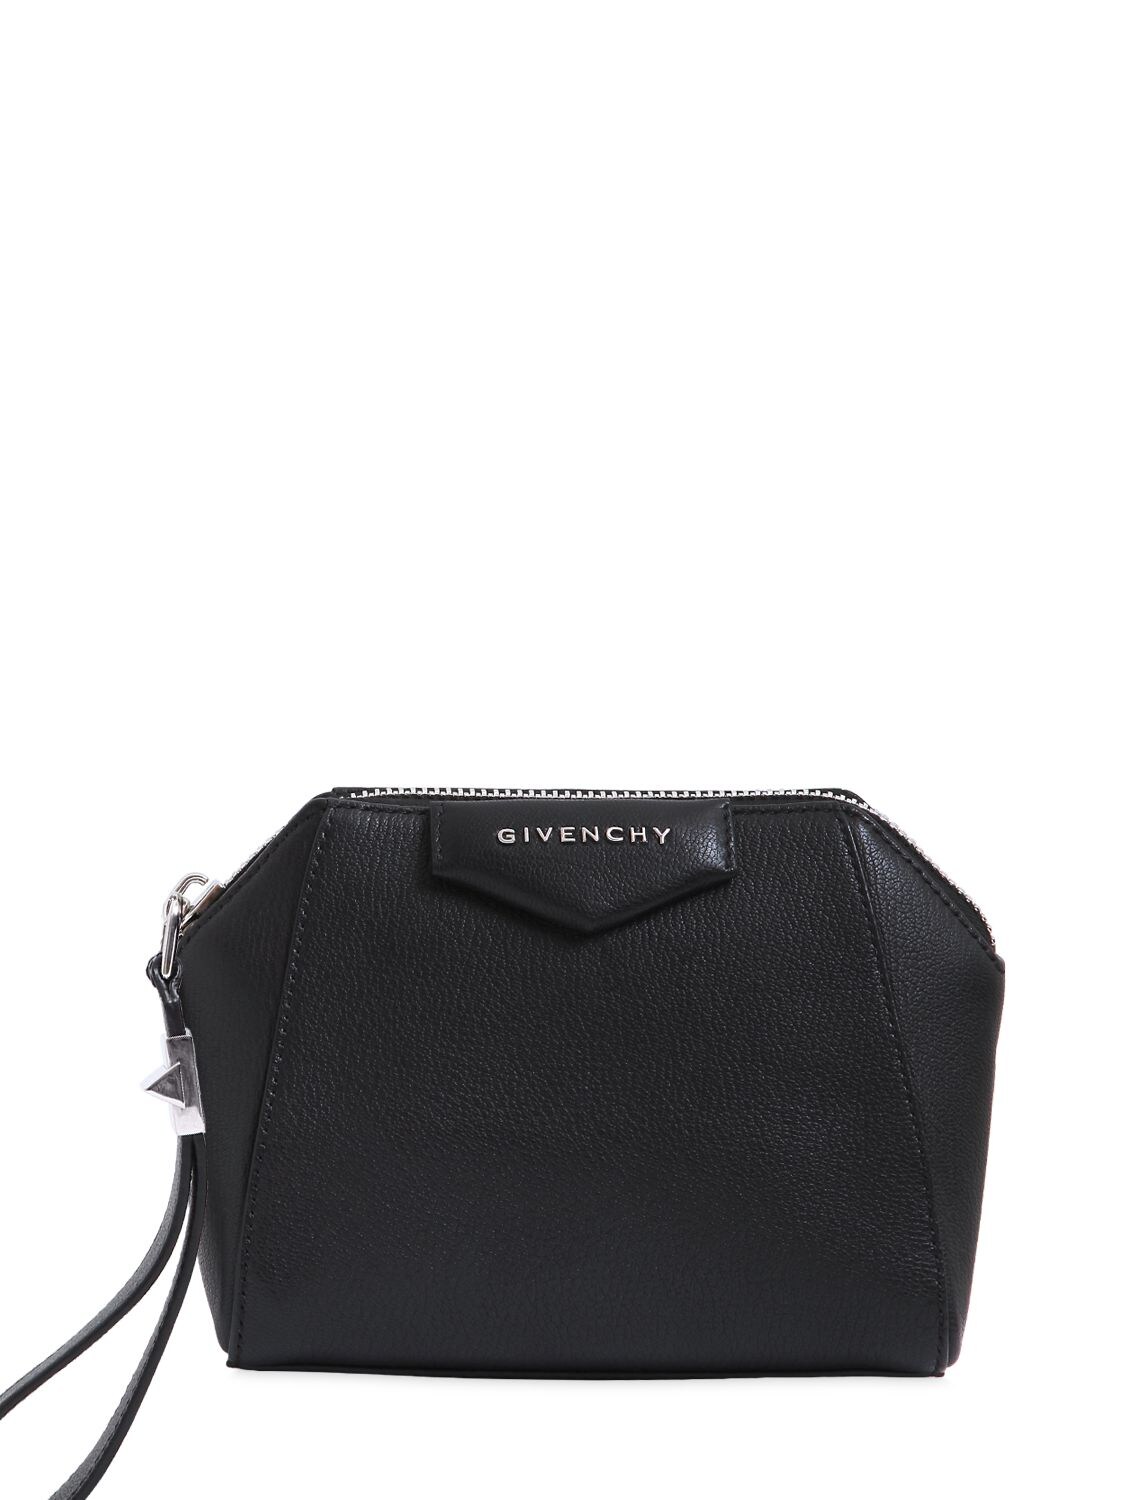 Givenchy Antigona Grained Leather Pouch In Black